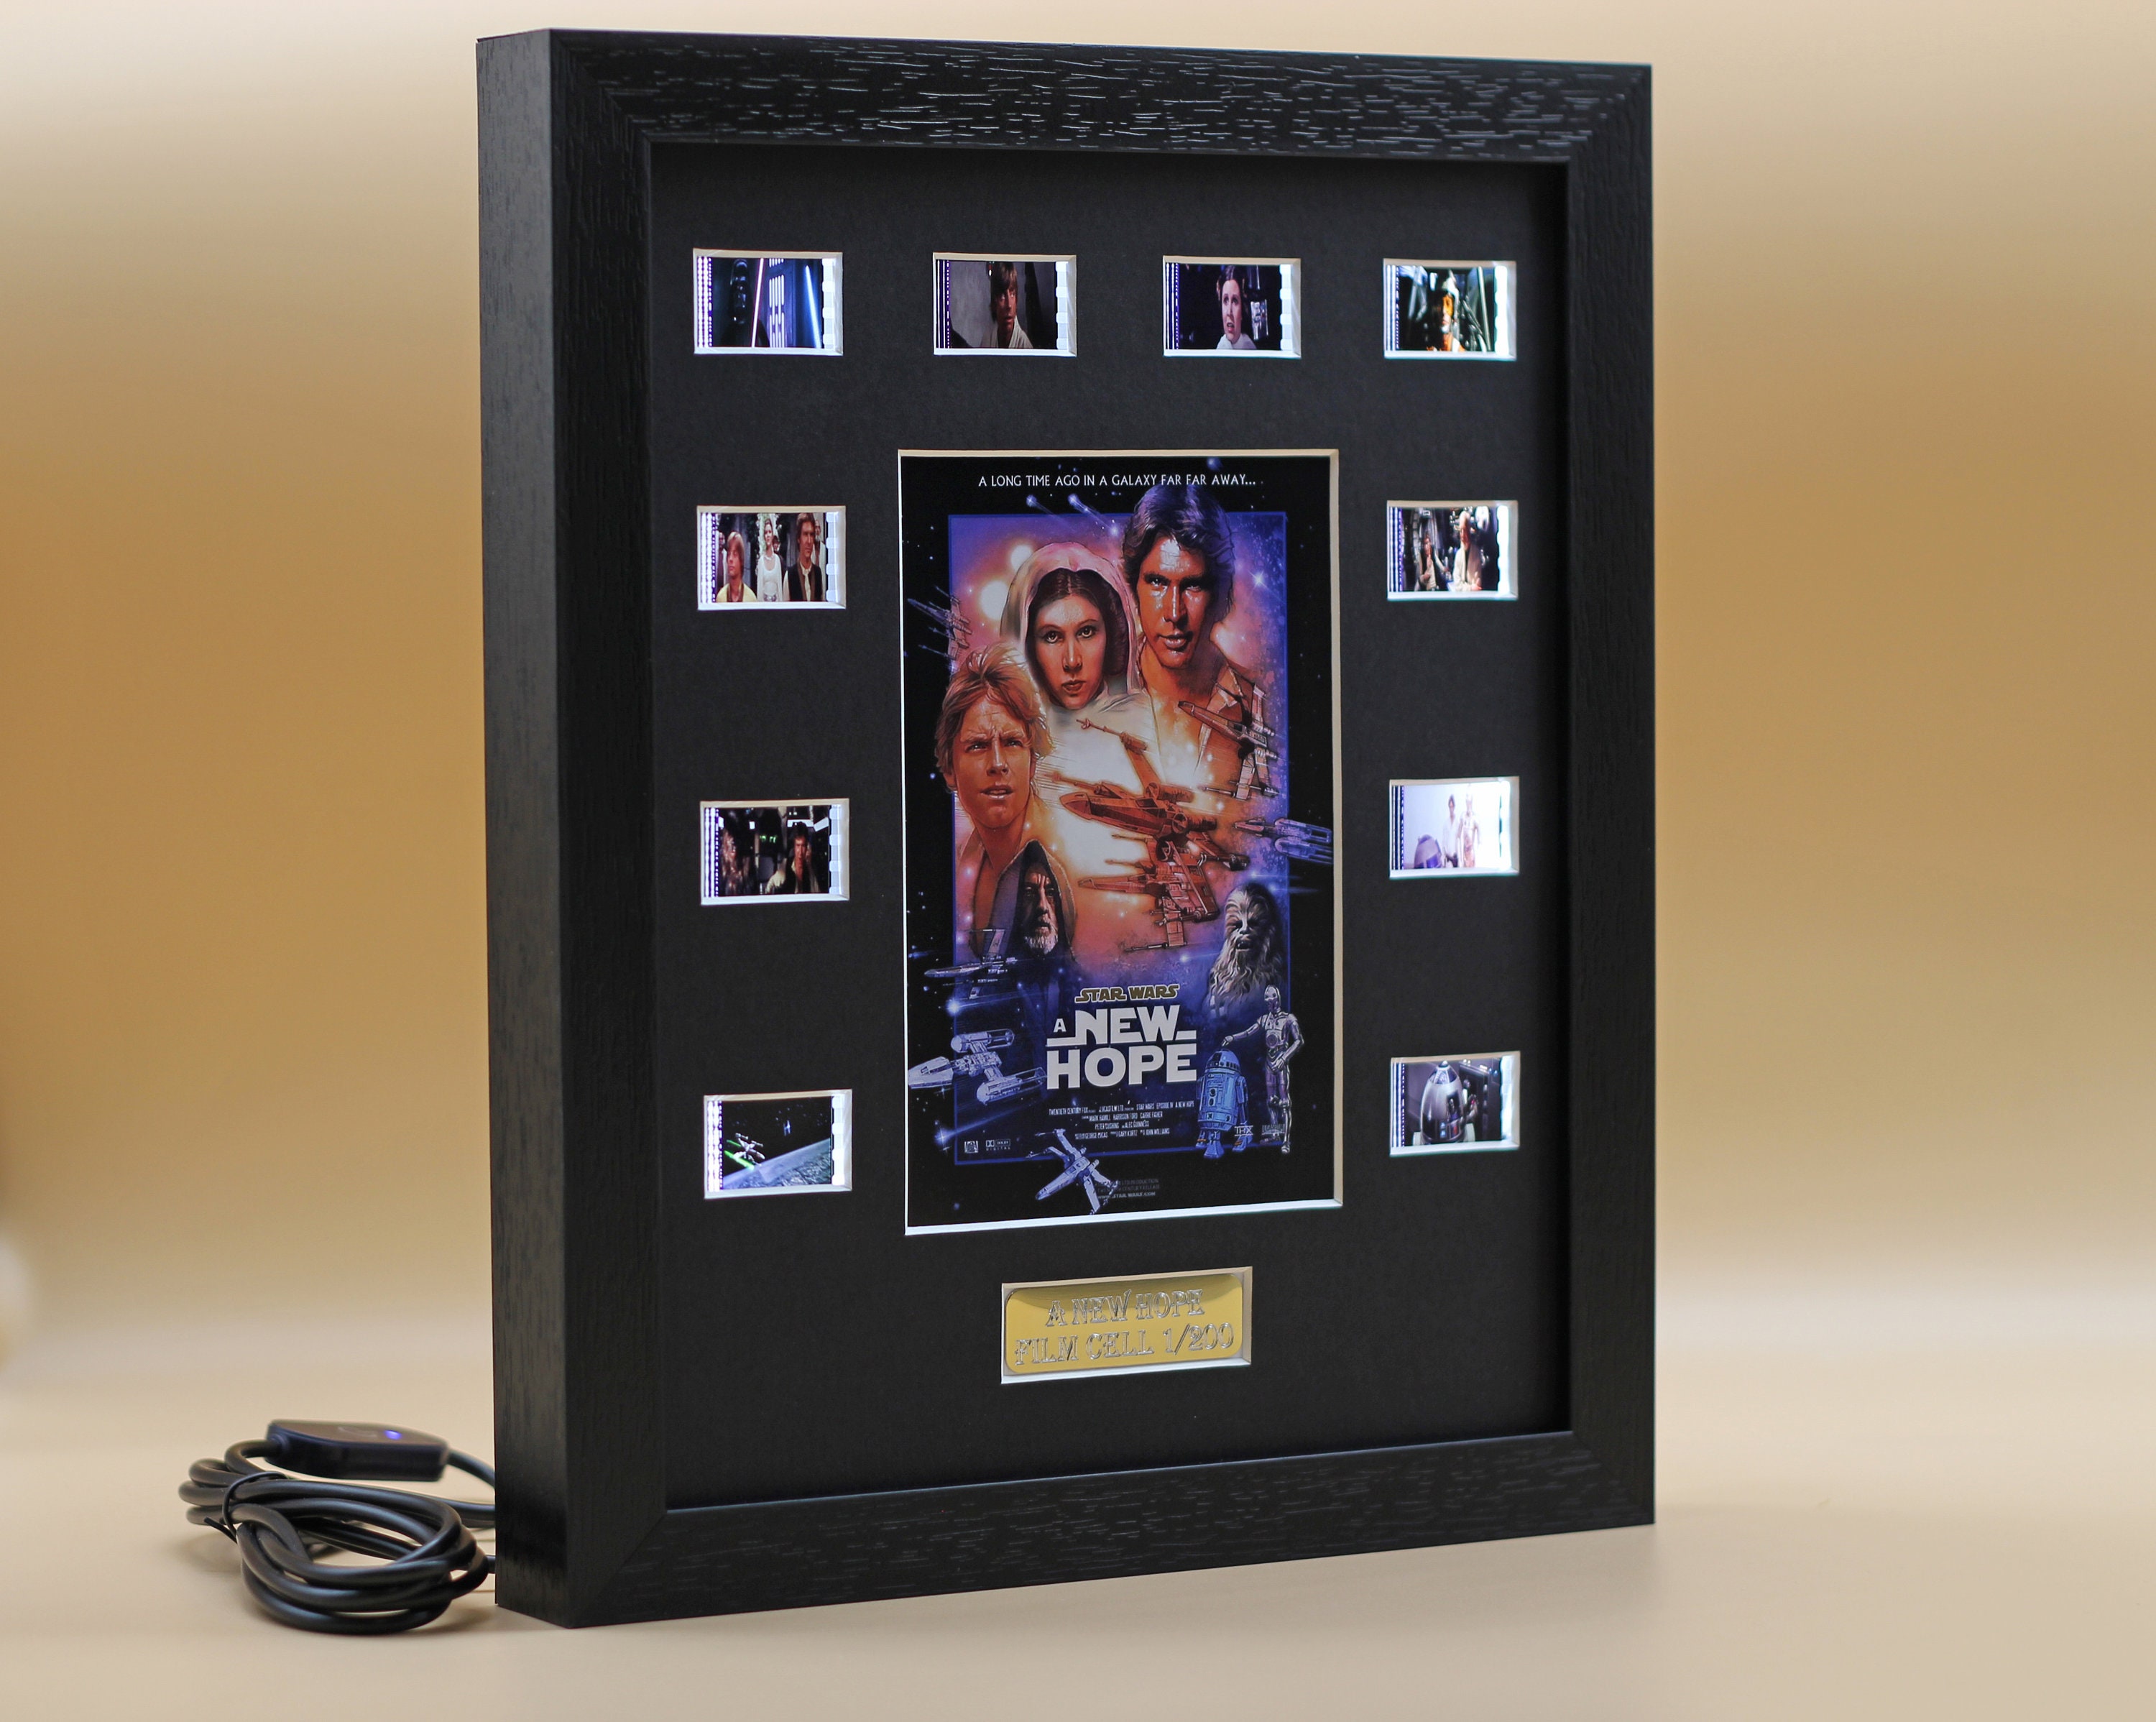  FILMCELLS Star Wars Episode VI Return of the Jedi - Darth Vader  11 x 13 Mini Montage Framed Movie Wall Art - Ten (10) 35 mm Film Cells -  Special Edition Officially Licensed Collectible : Office Products